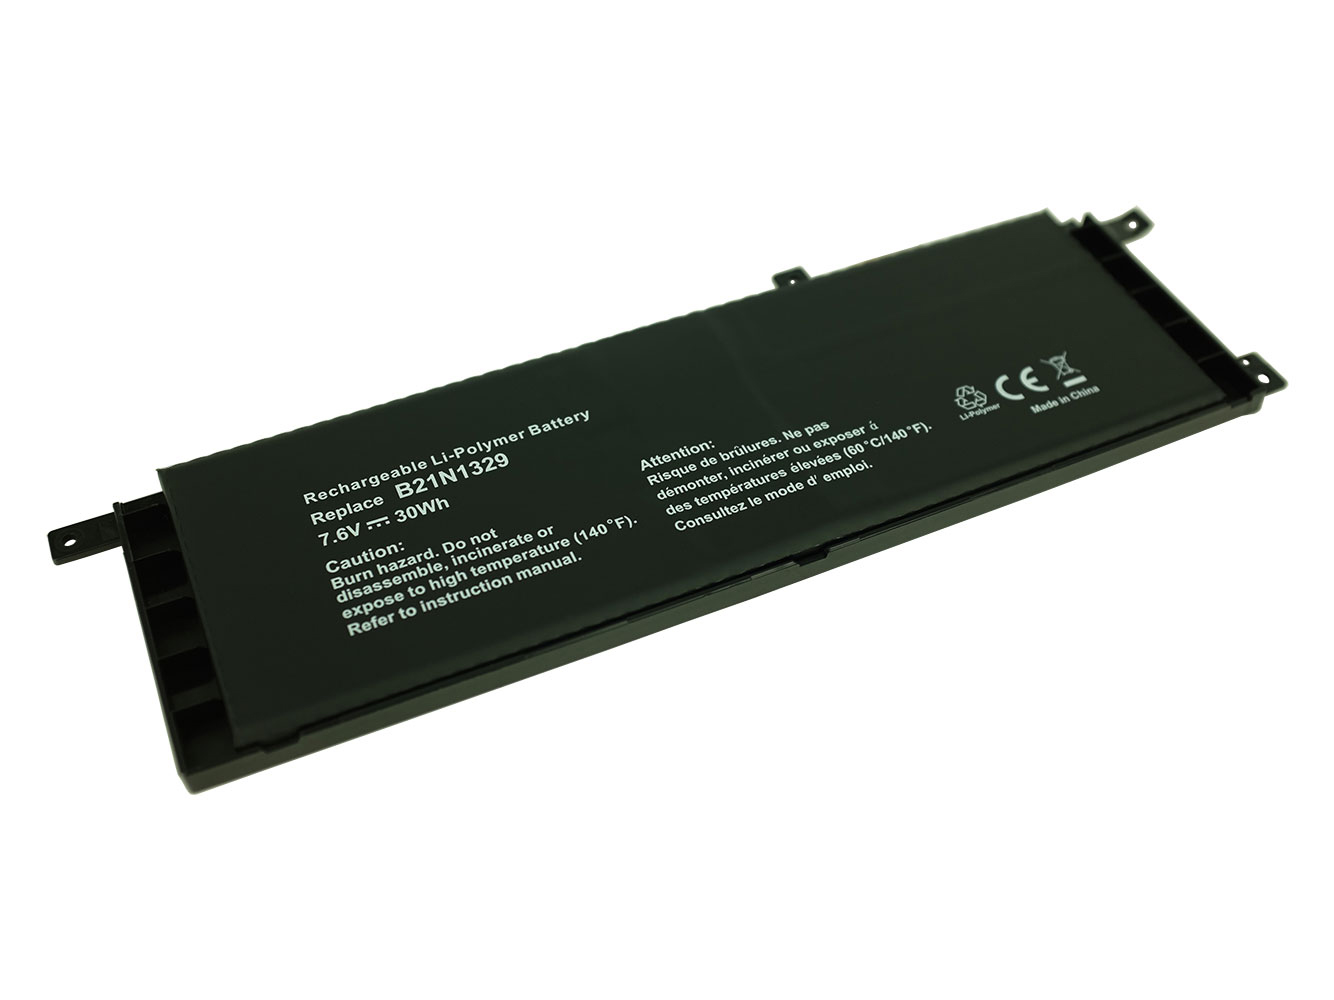 TUF Gaming FX505DT-AL043T Laptop Batteries for Asus replacement